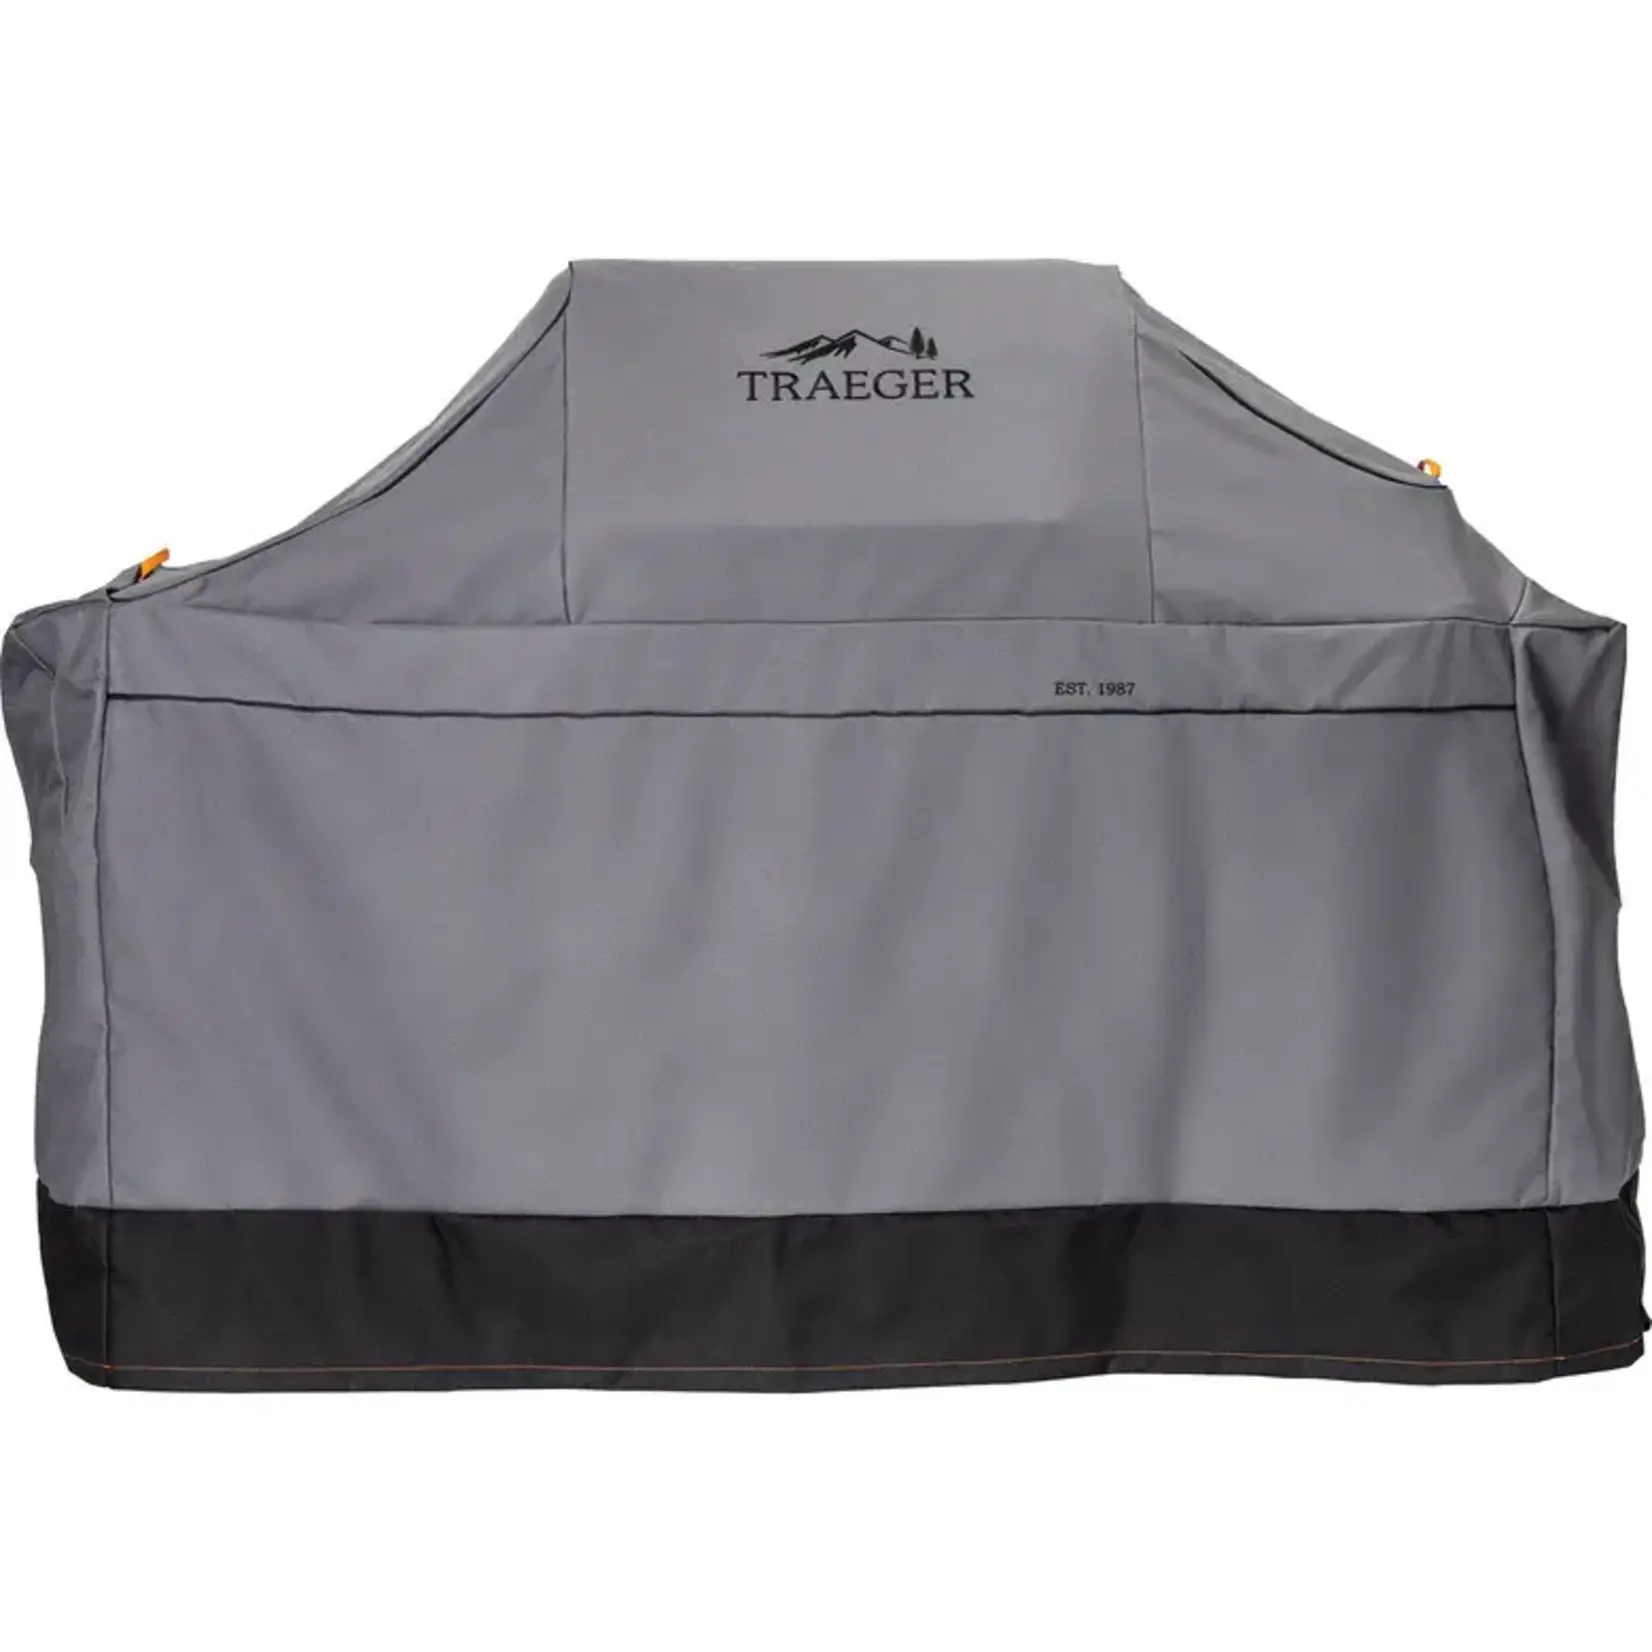 Traeger Full Length Grill Cover - Ironwood